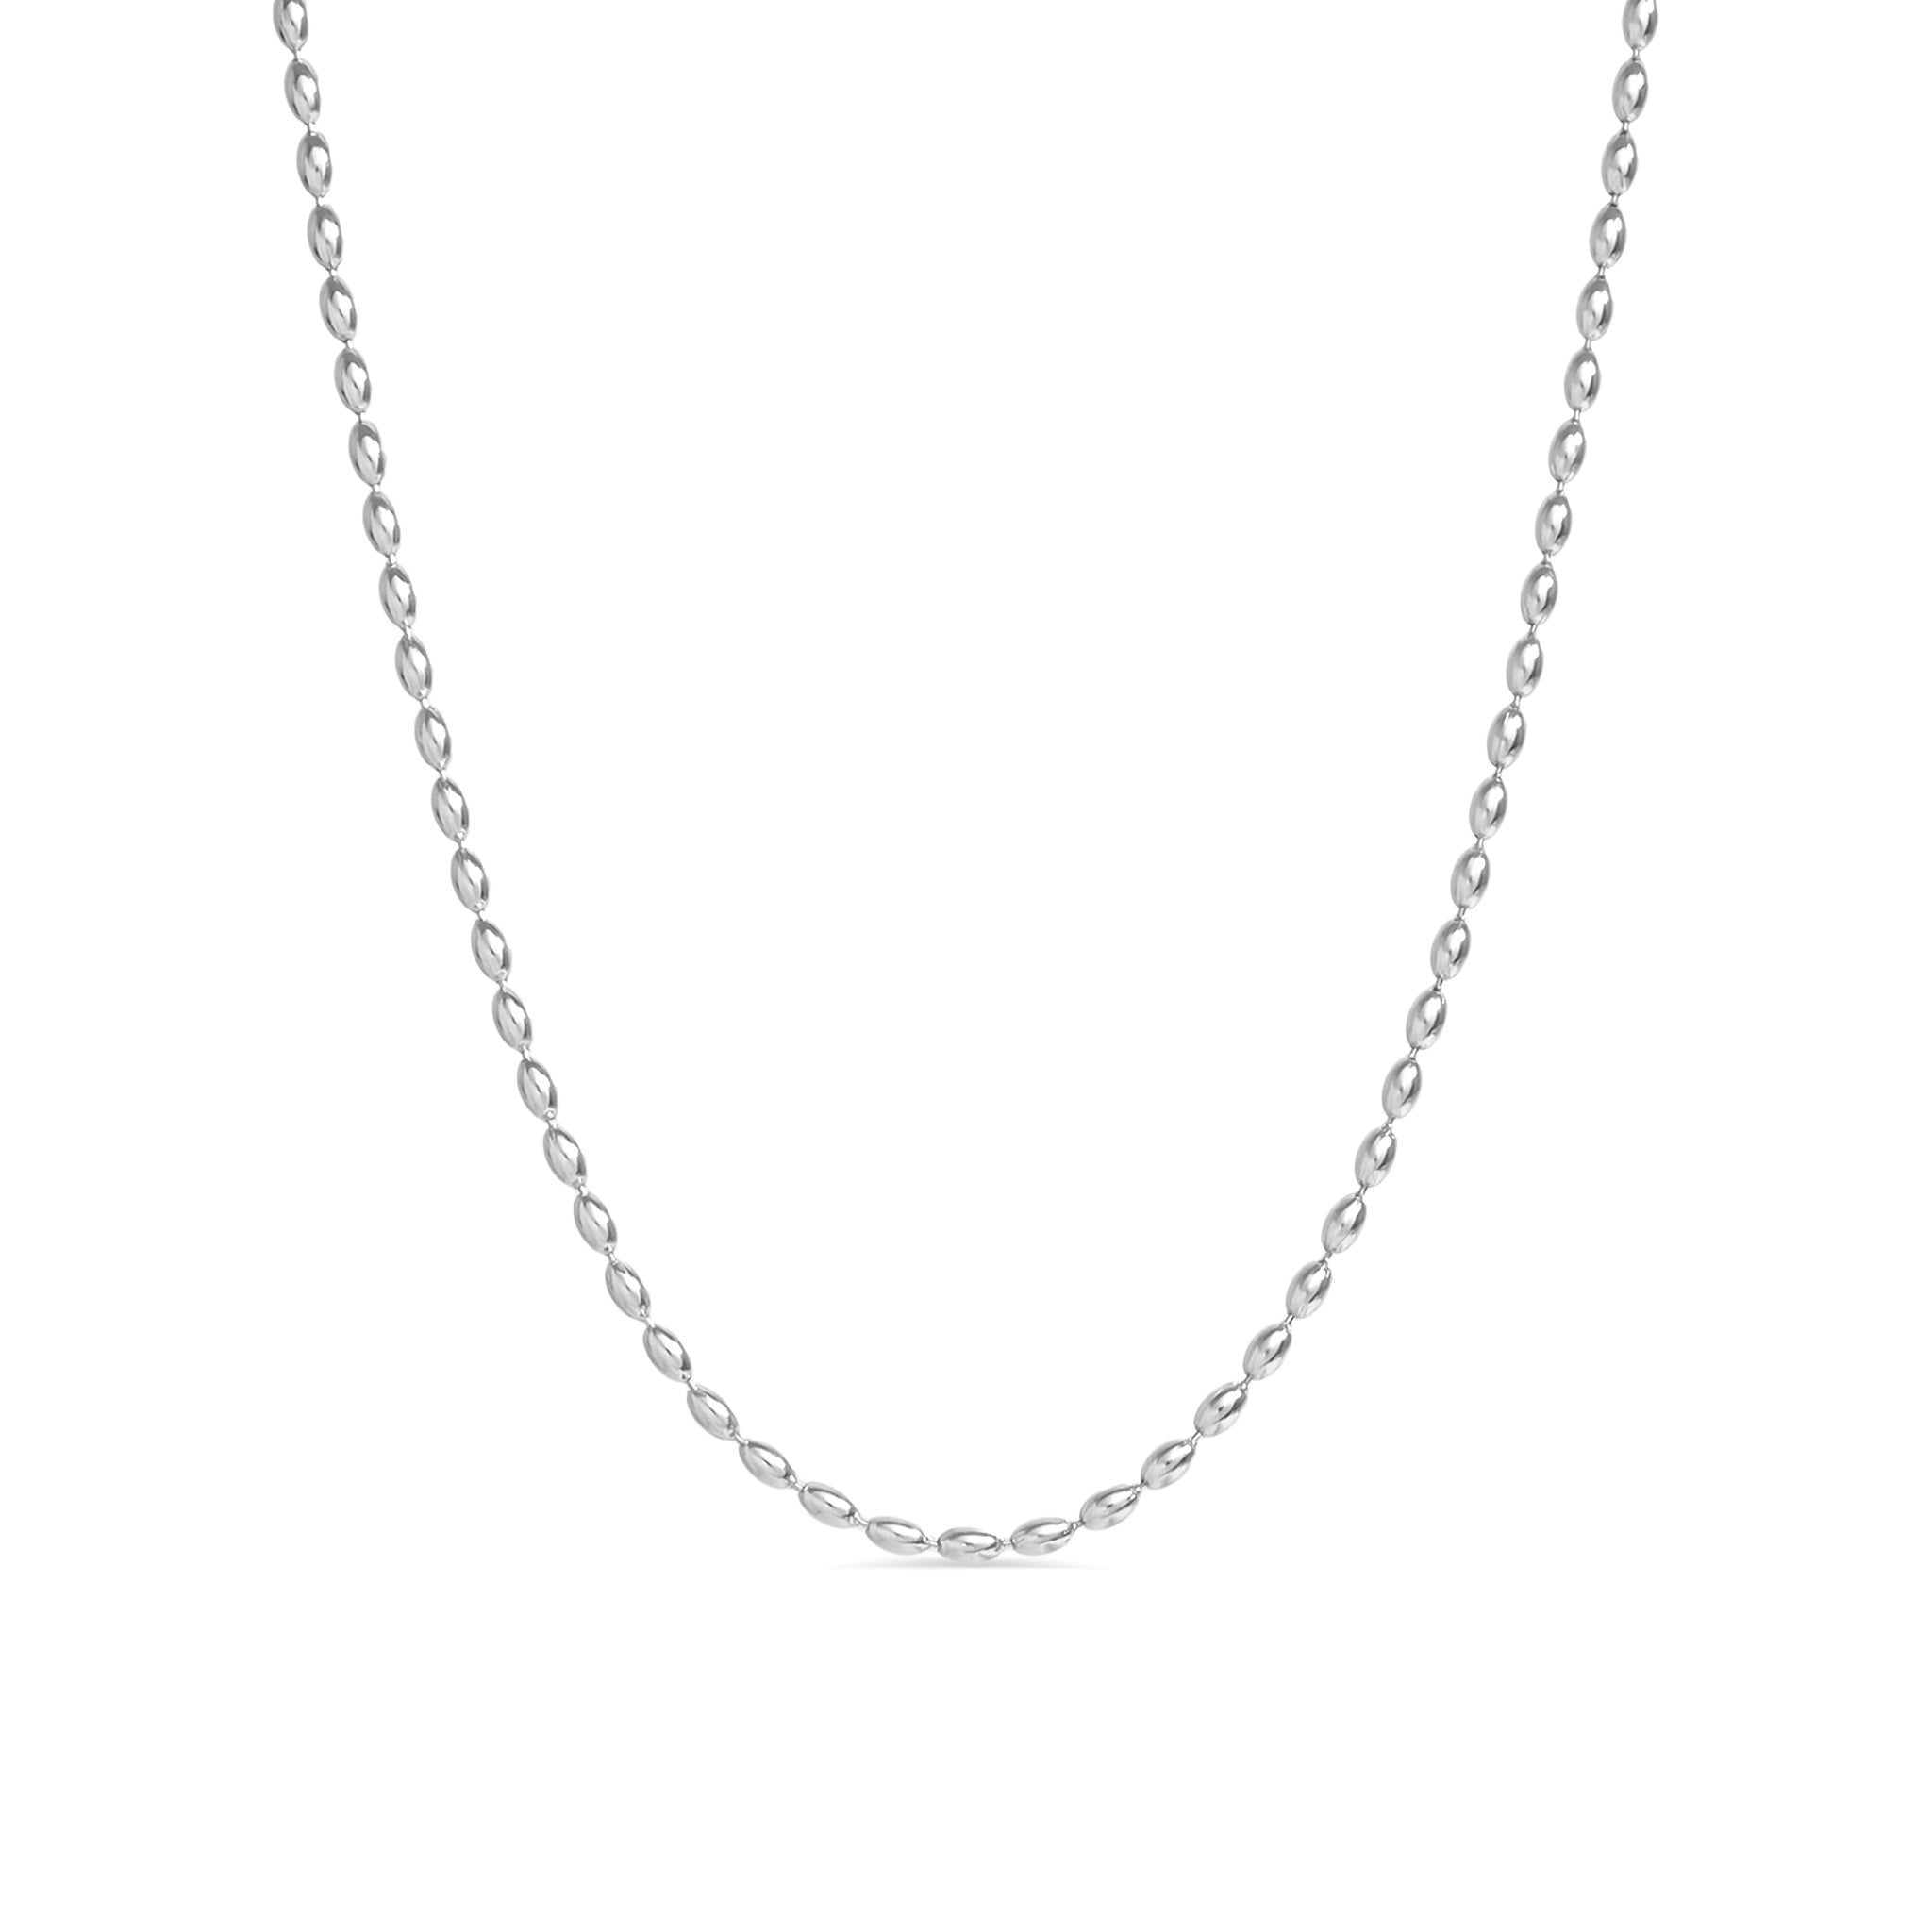 Oval Beaded Stainless Steel Necklace / NKJ0006